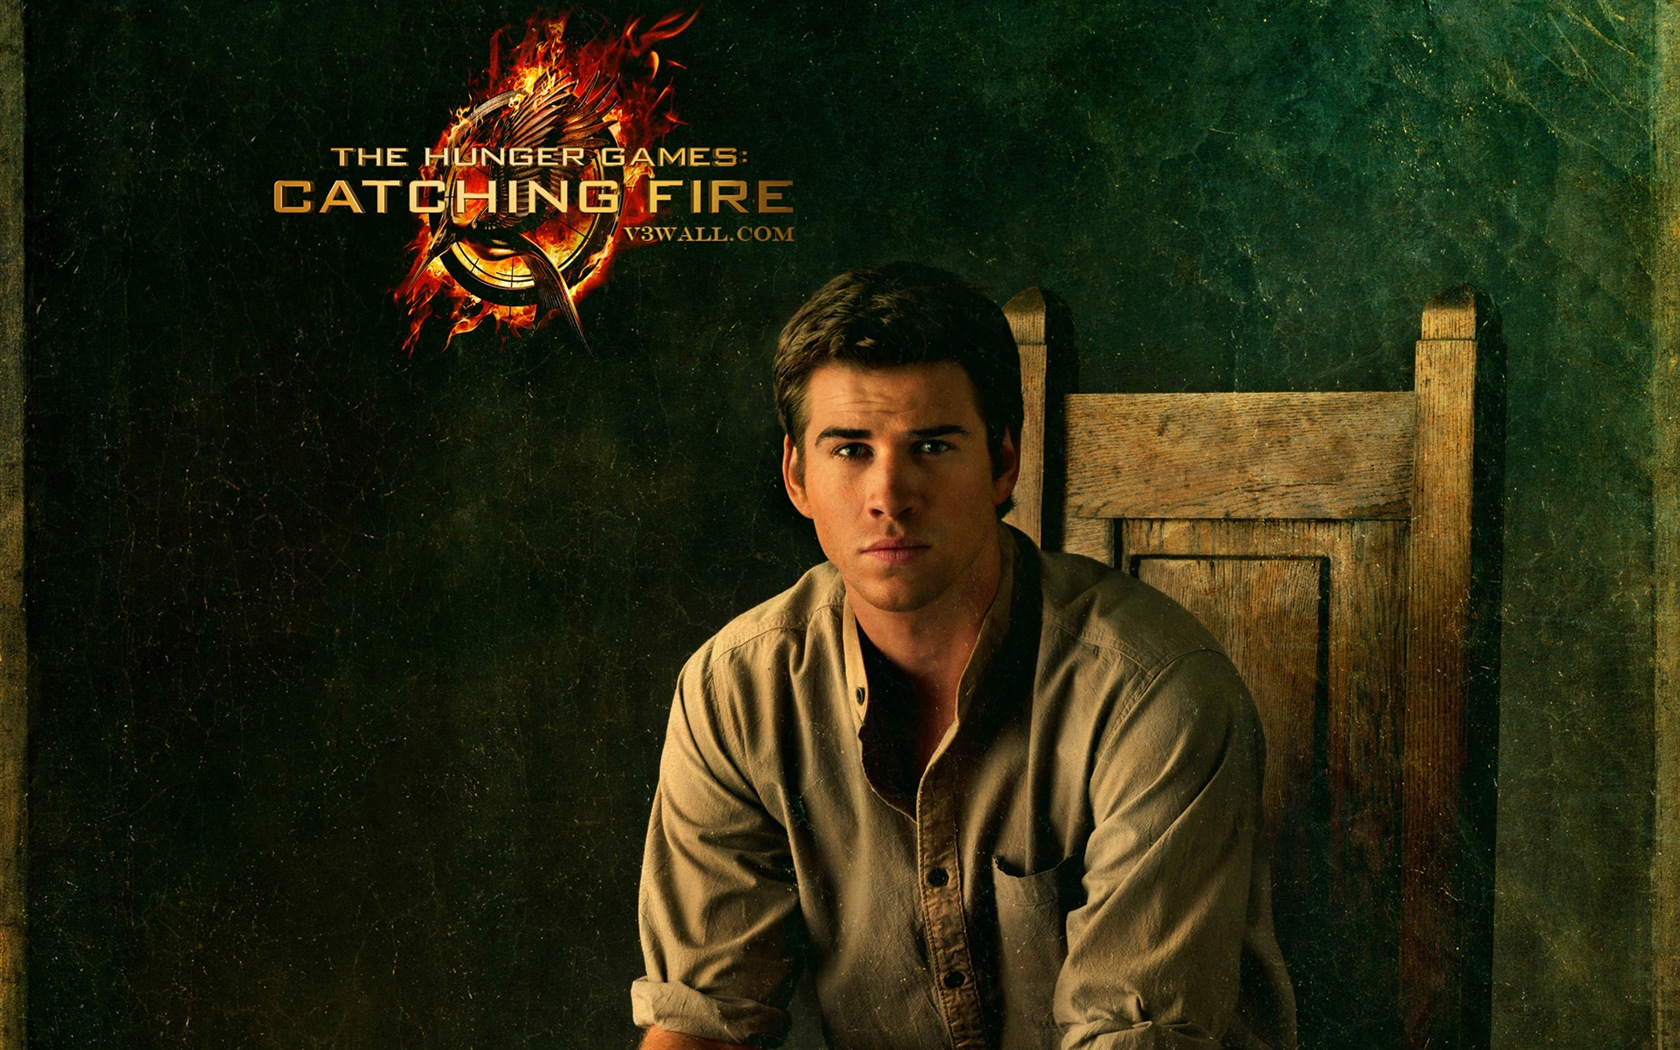 The Hunger Games: Catching Fire wallpapers HD #9 - 1680x1050